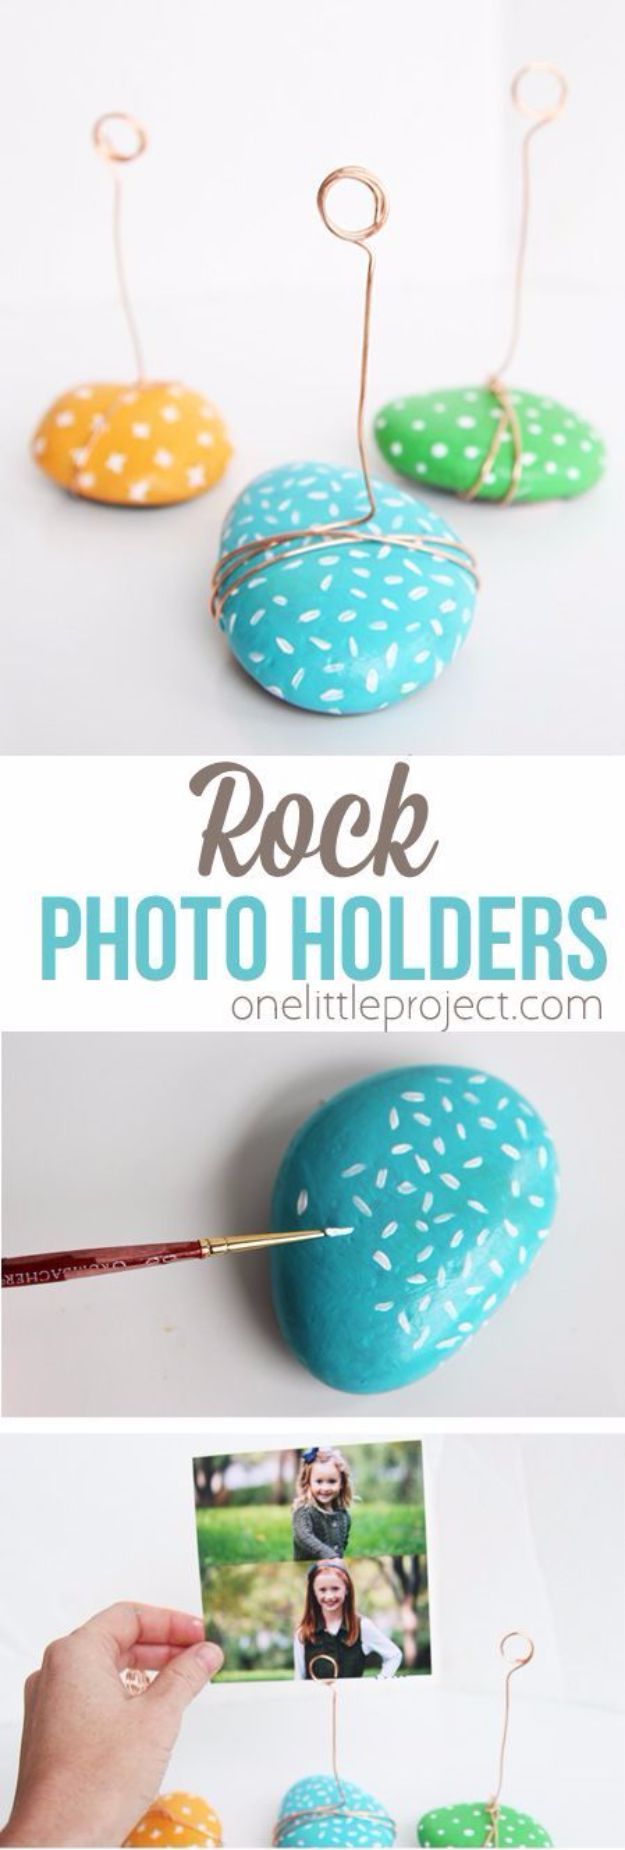 Crafts for Teens to Make and Sell - DIY Rock Photo Holder - Cheap and Easy DIY Ideas To Make For Extra Money - Best Things to Sell On Etsy, Dollar Store Craft Ideas, Quick Projects for Teenagers To Make Spending Cash - DIY Gifts, Wall Art, School Supplies, Room Decor, Jewelry, Fashion, Hair Accessories, Bracelets, Magnets #teencrafts #craftstosell #etsyideass